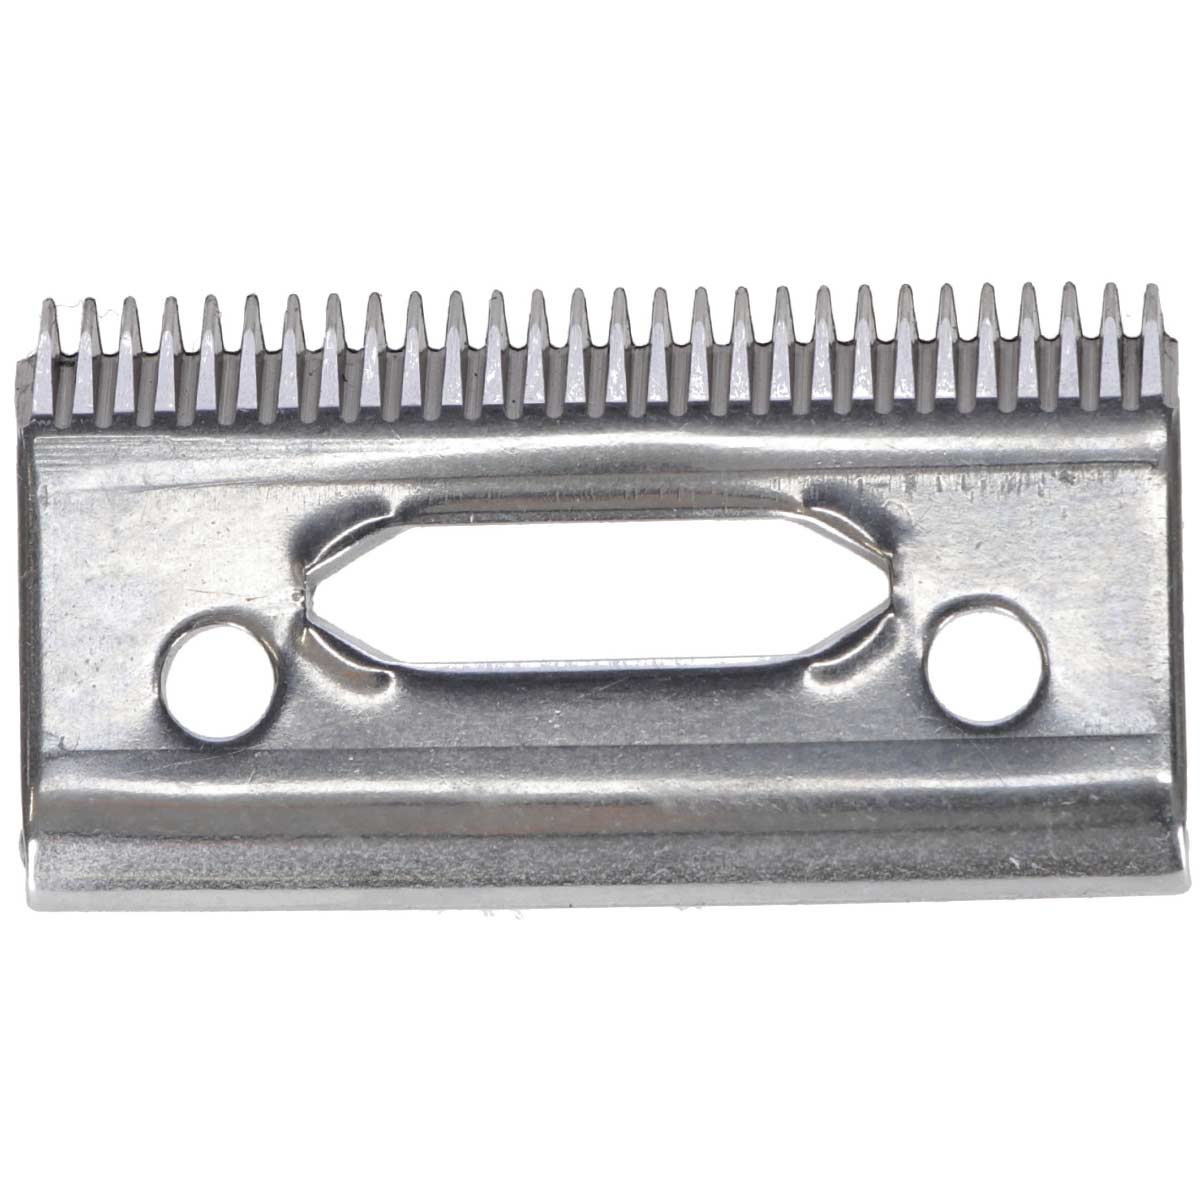 Clipster Clipper Blade for TaproX 2.0